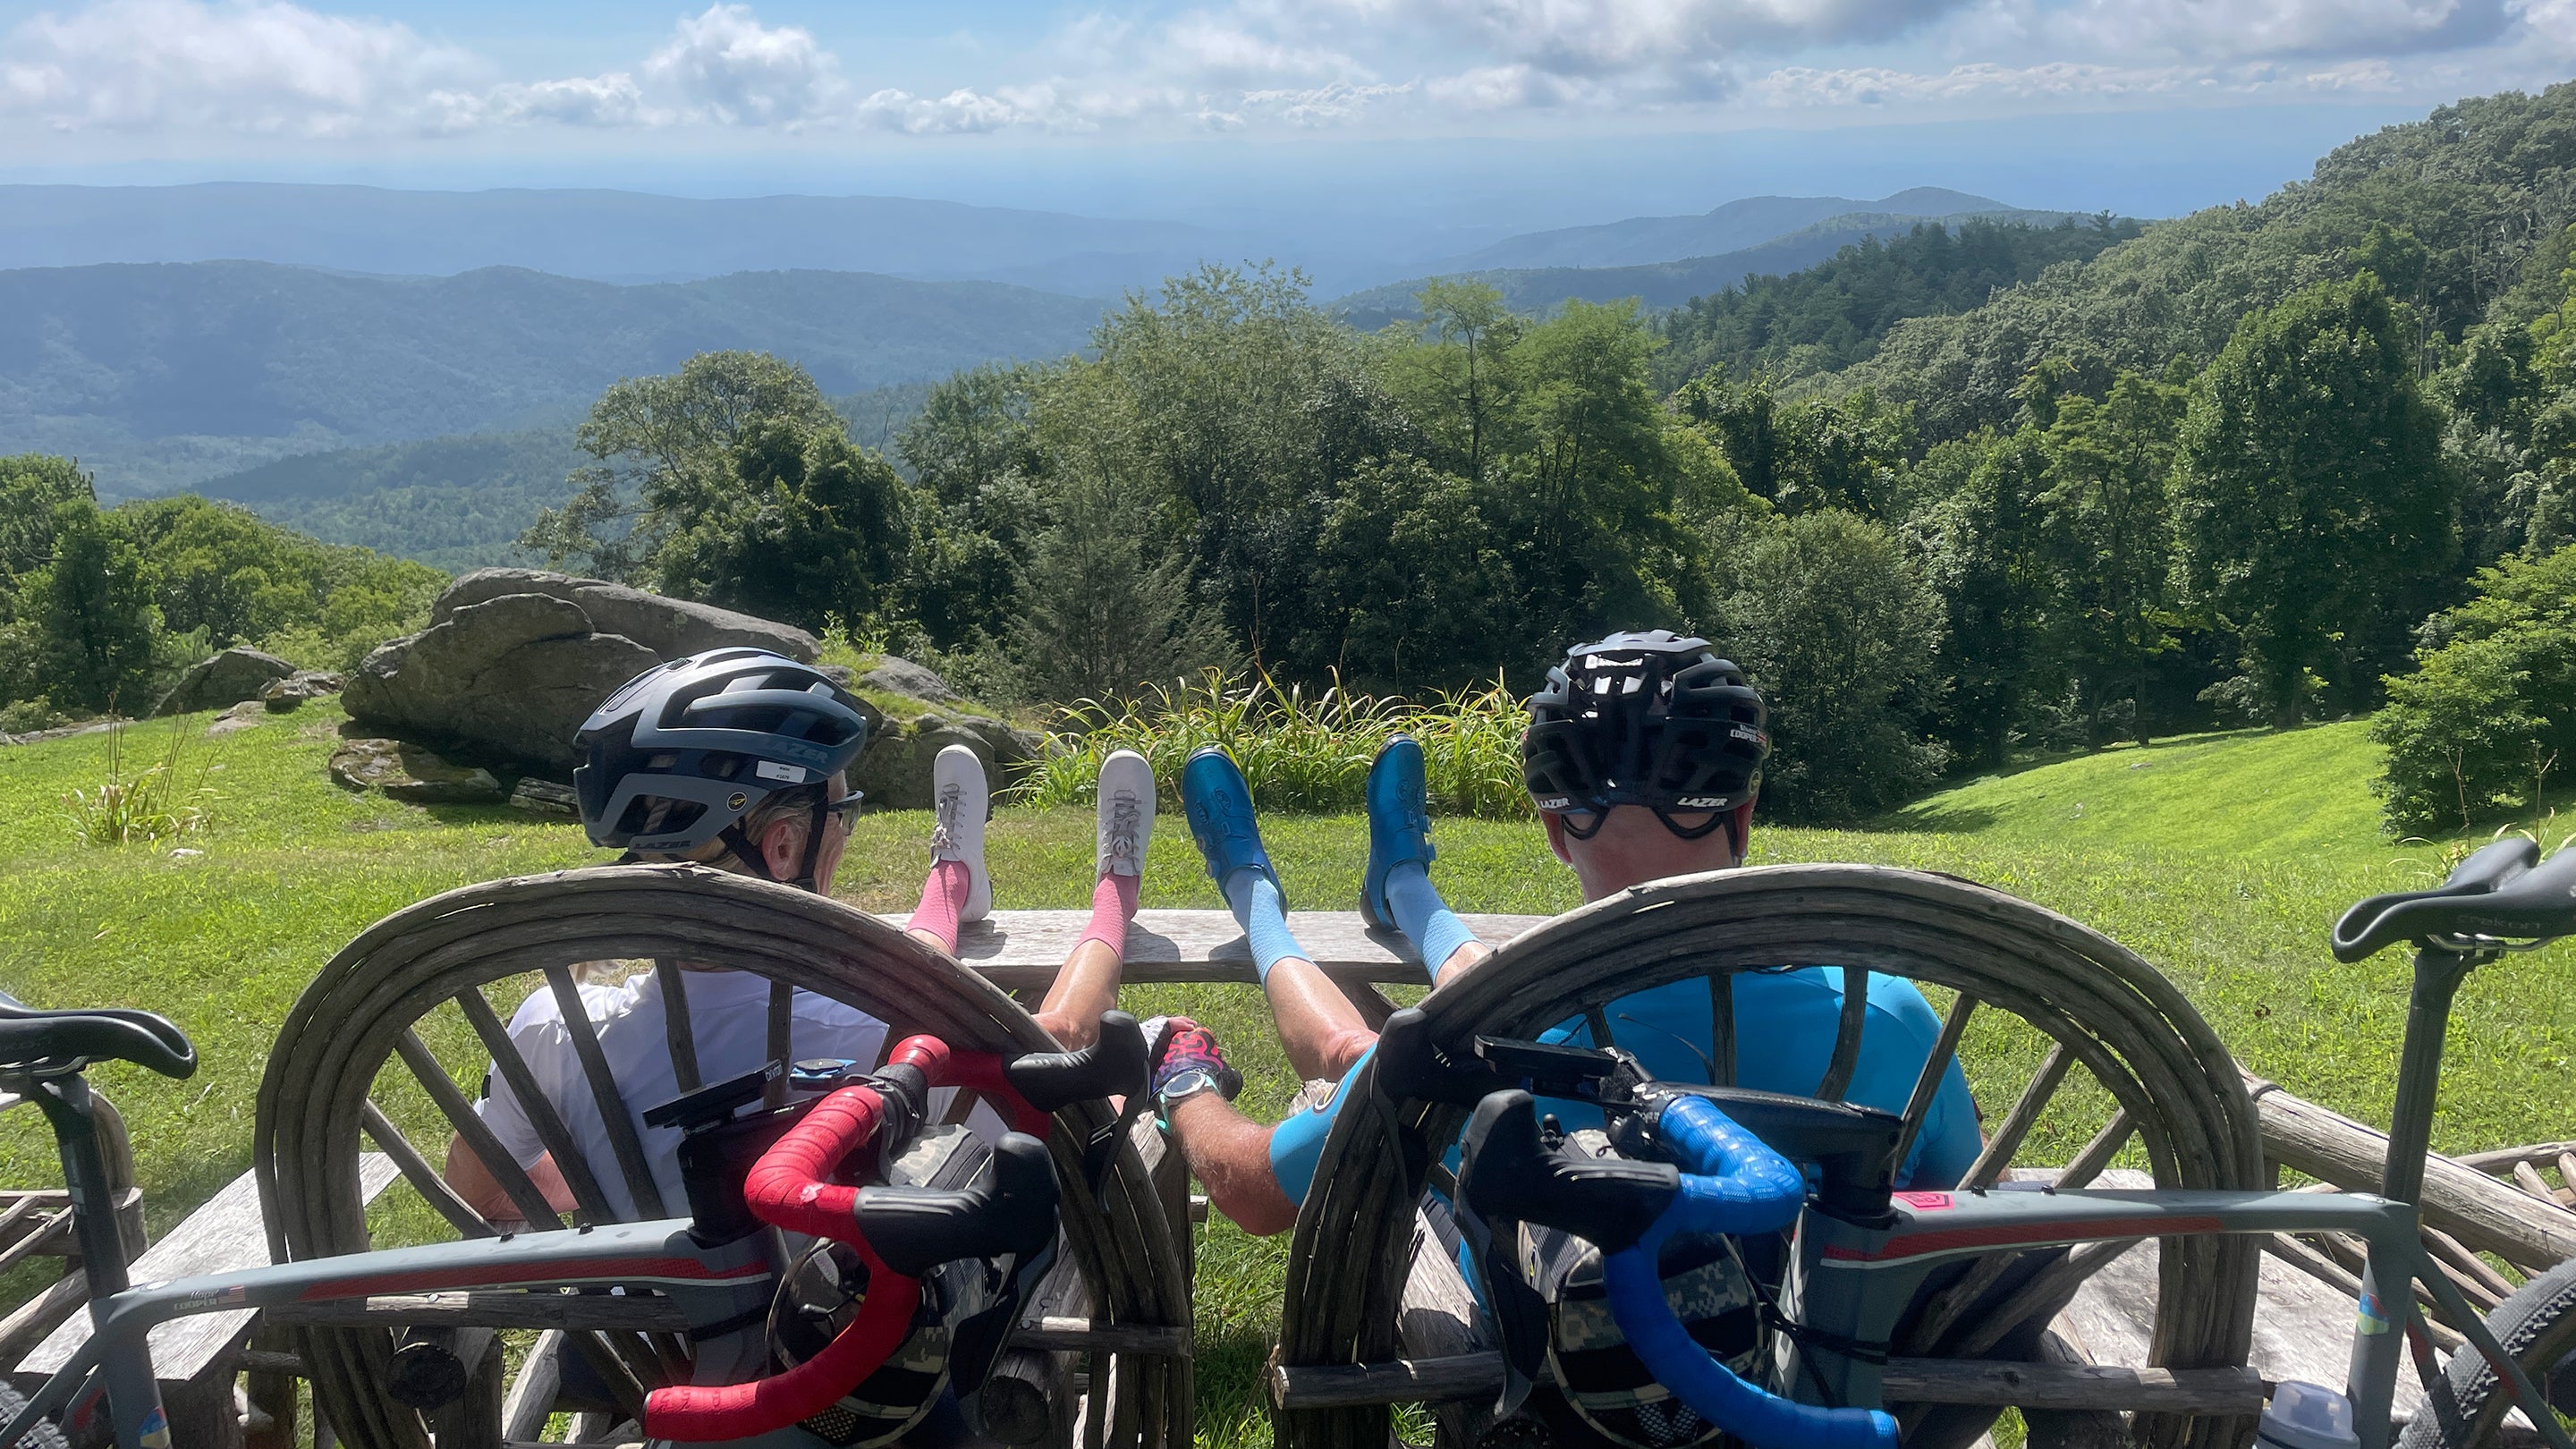 Shane and Hope Cooper sit holding hands, taking a cycling break on the top of a mountain